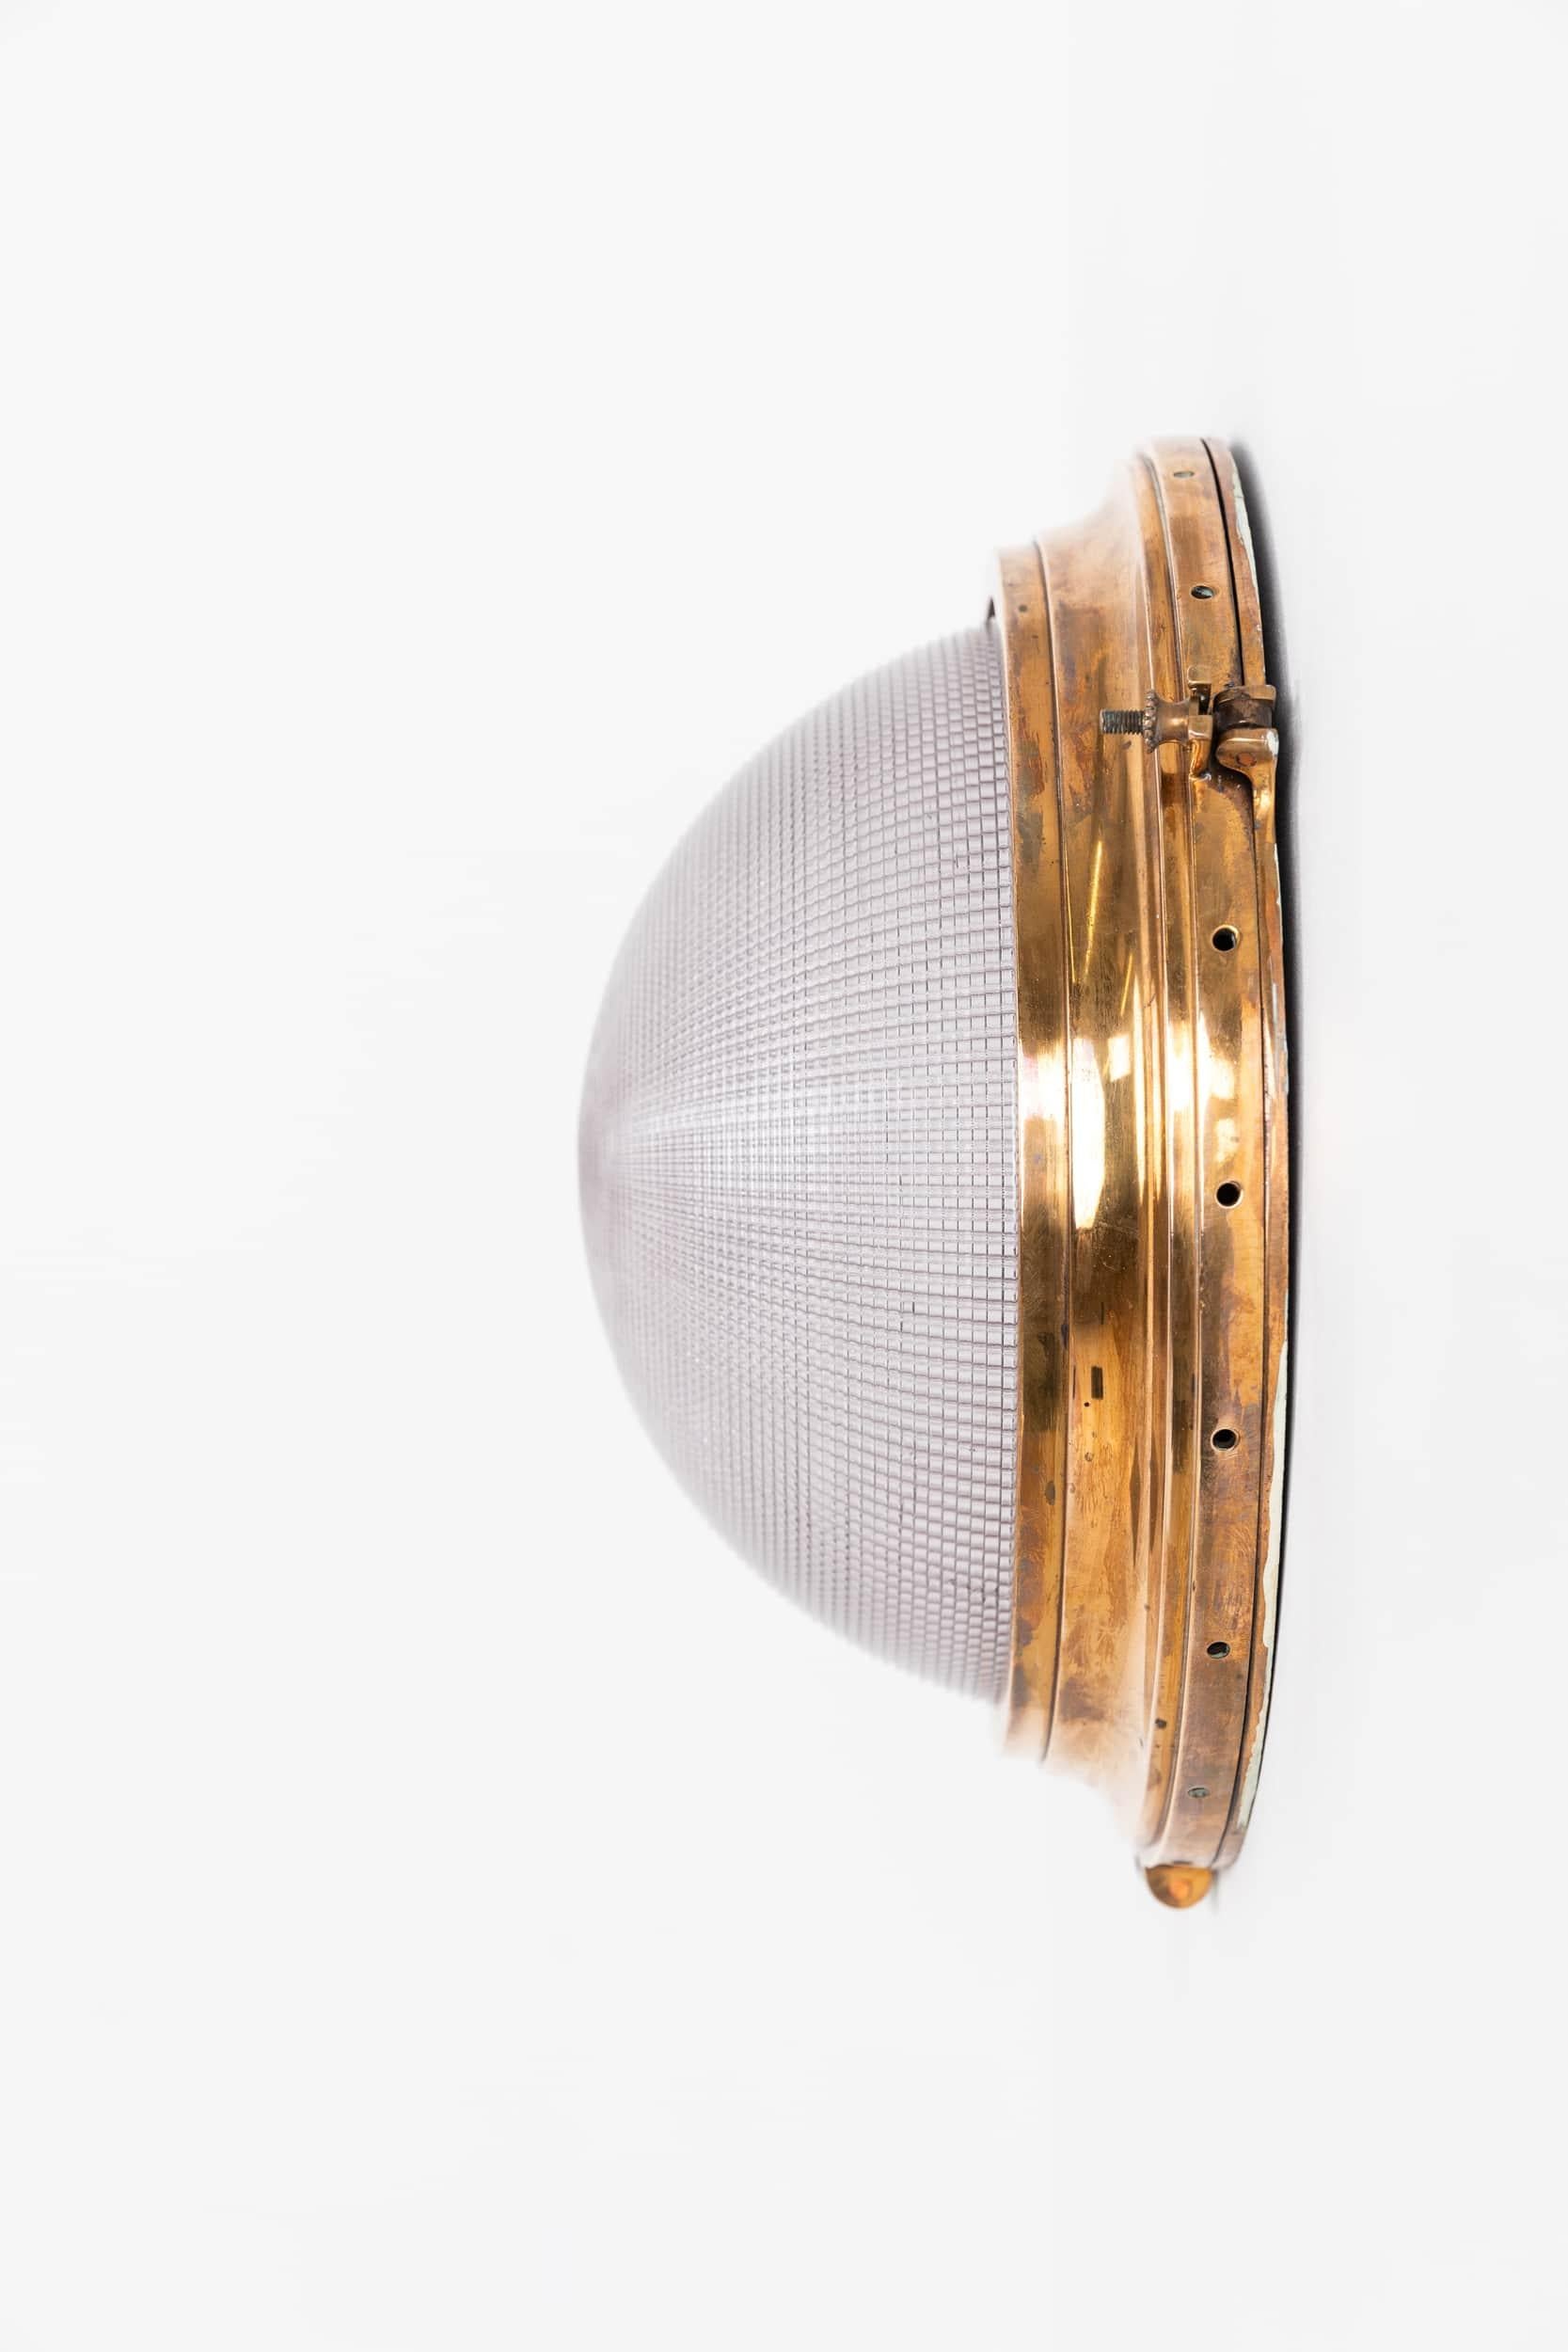 Mid-20th Century Antique Holophane Prismatic Glass Brass Flush Mounted Wall Sconce Lamp, c.1920